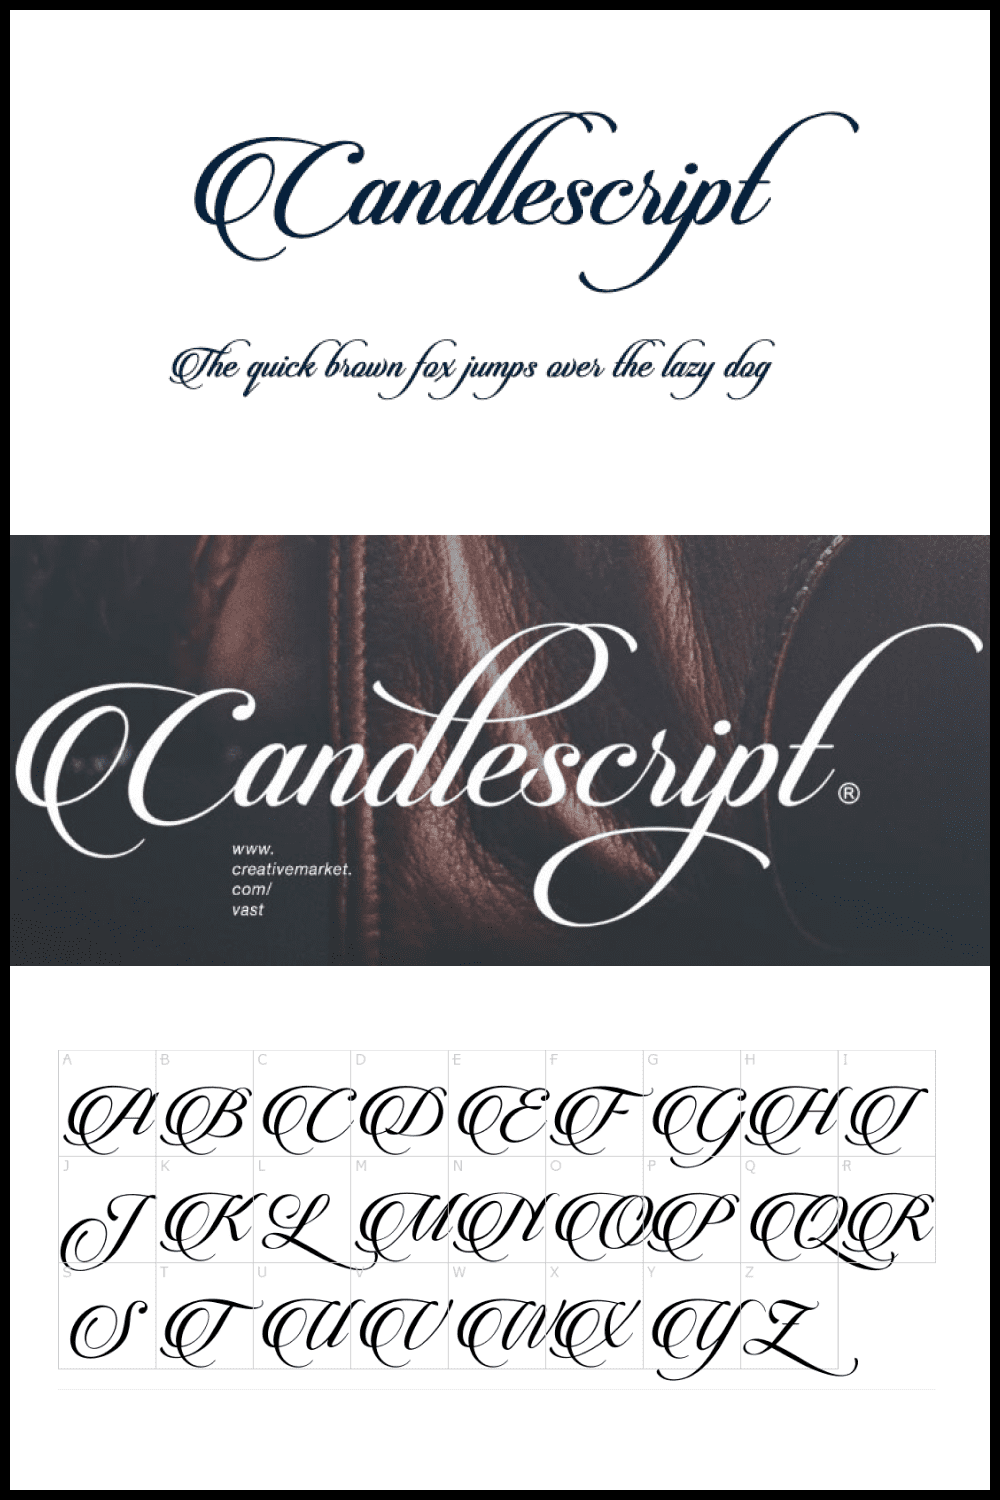 This font is like the sound of a piano - gentle and serene.